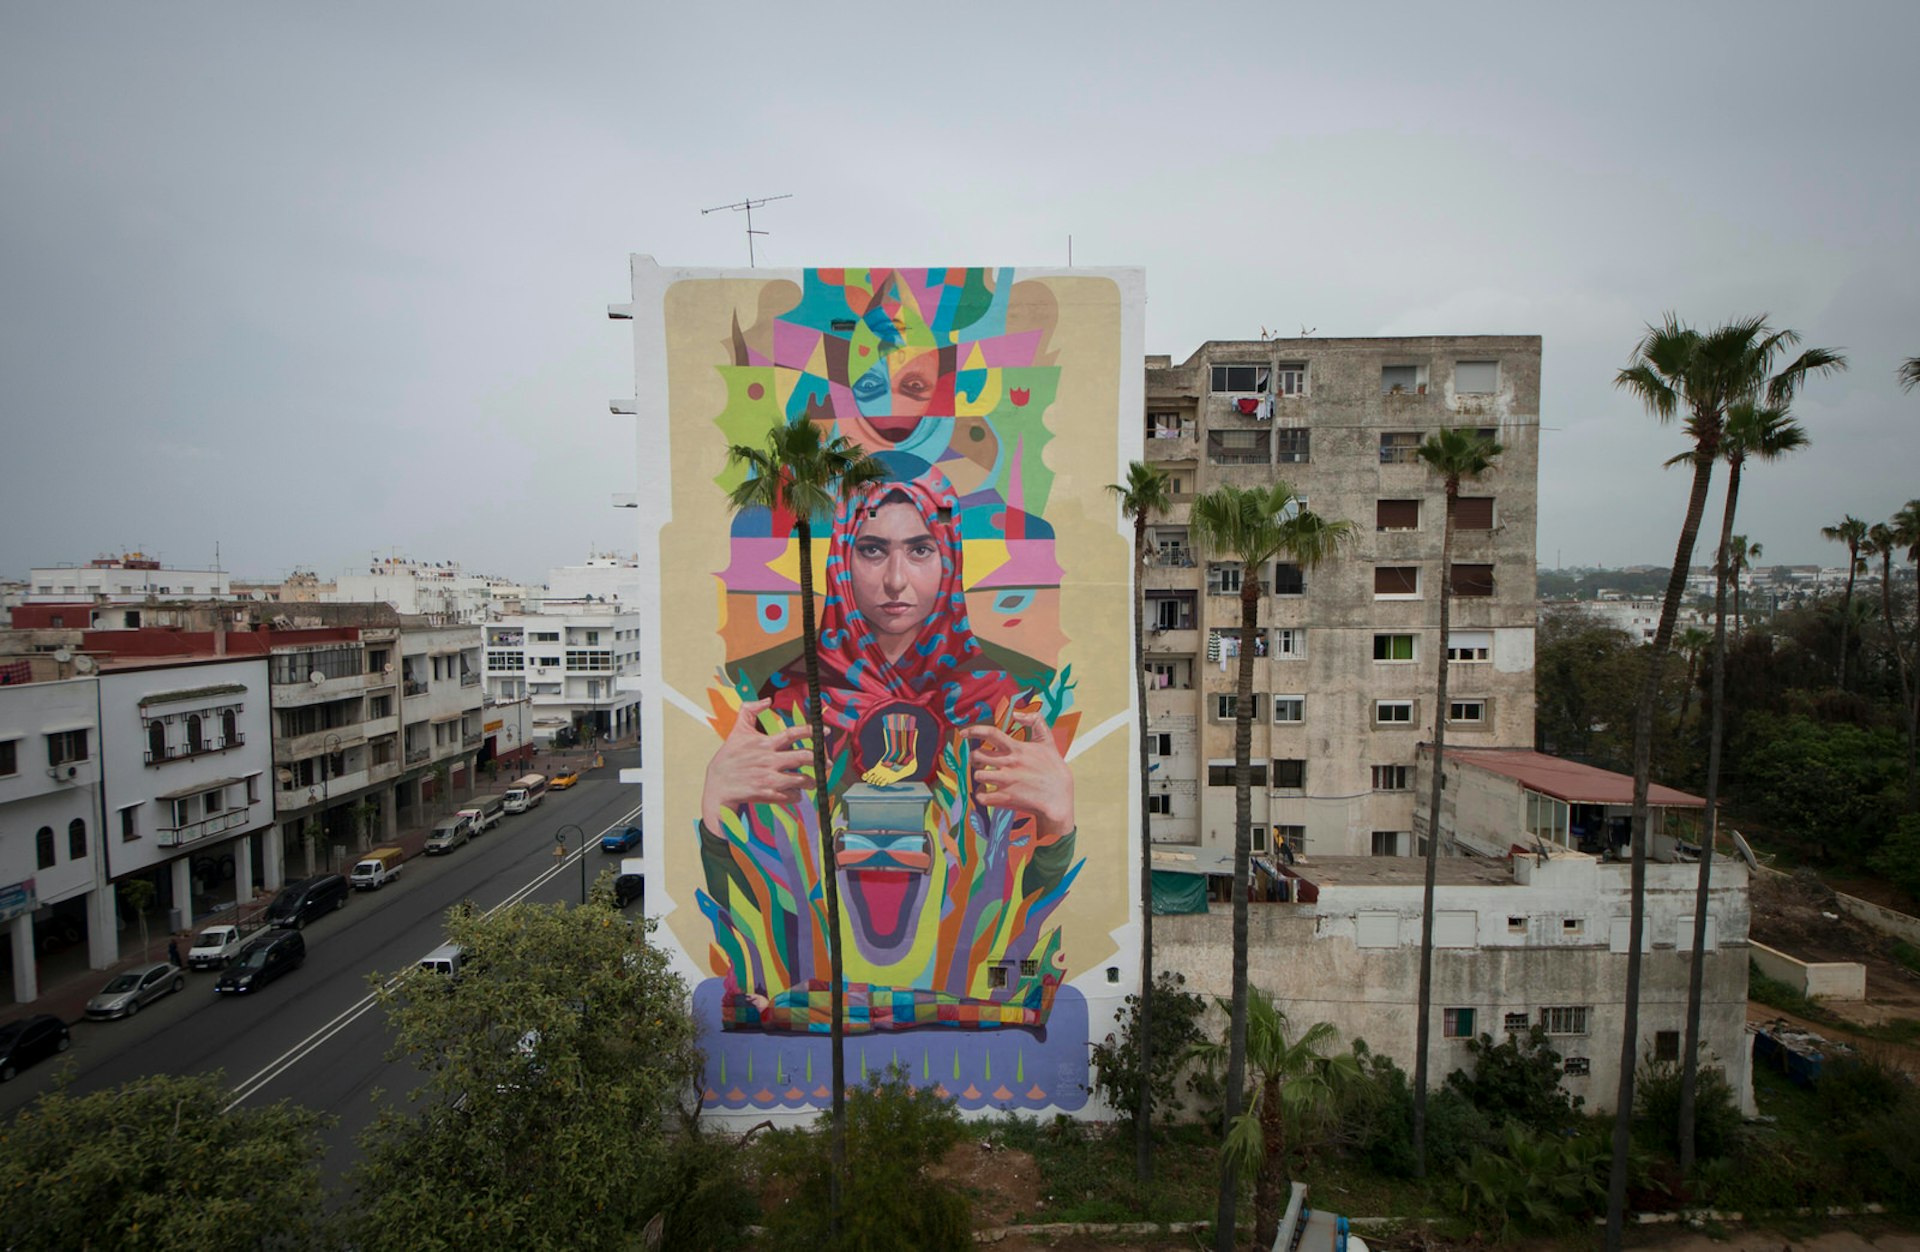 Building-high mural titled The step that transcends time is the collective step' by street artist Decertor in Rabat, Morocco © Walid Ben Brahim / JIDAR2018